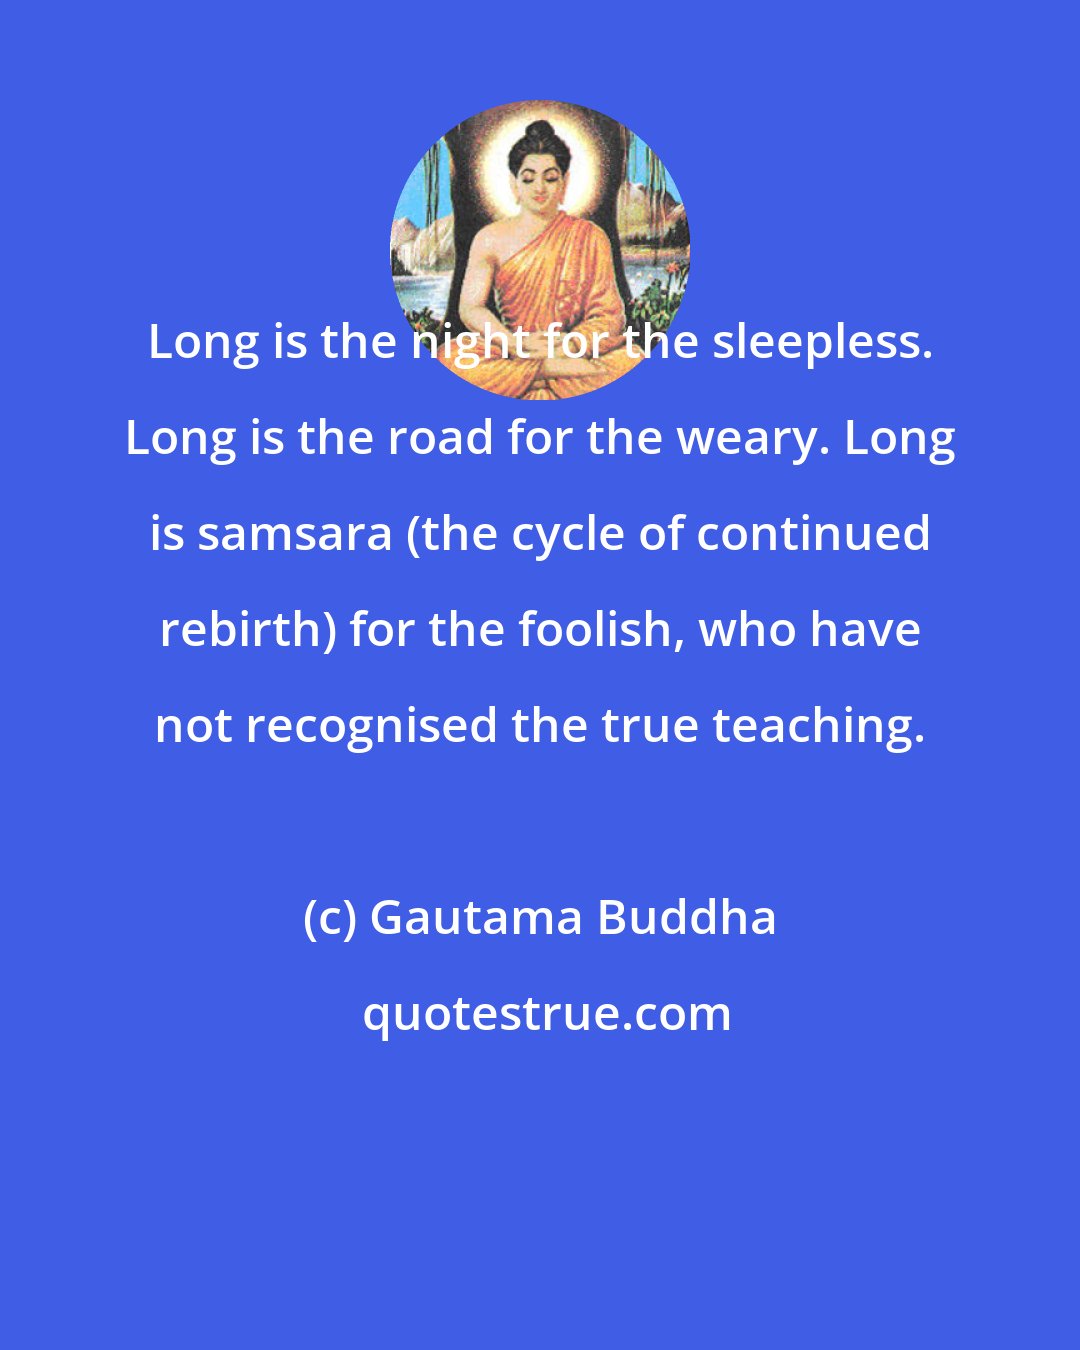 Gautama Buddha: Long is the night for the sleepless. Long is the road for the weary. Long is samsara (the cycle of continued rebirth) for the foolish, who have not recognised the true teaching.